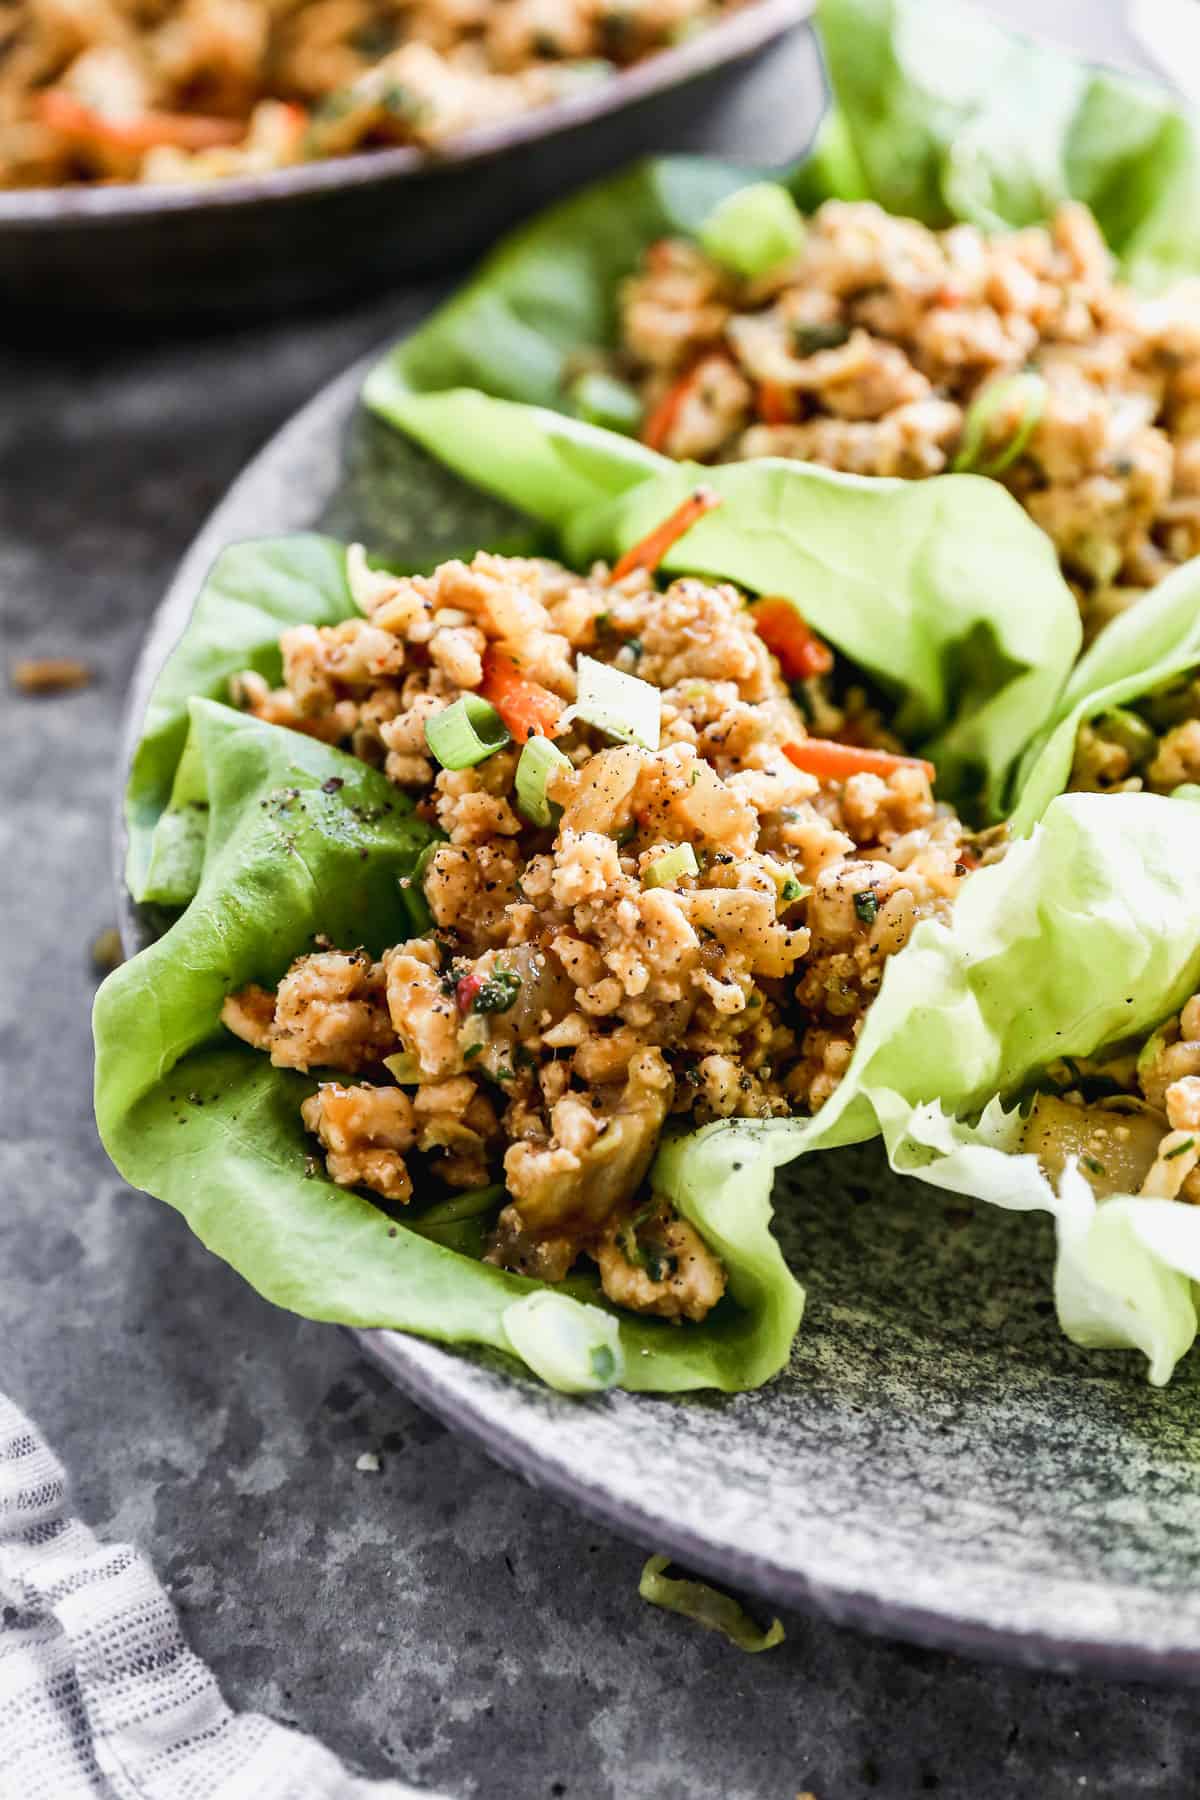 A close up image of a Thai Lettuce Wrap, ready to enjoy.